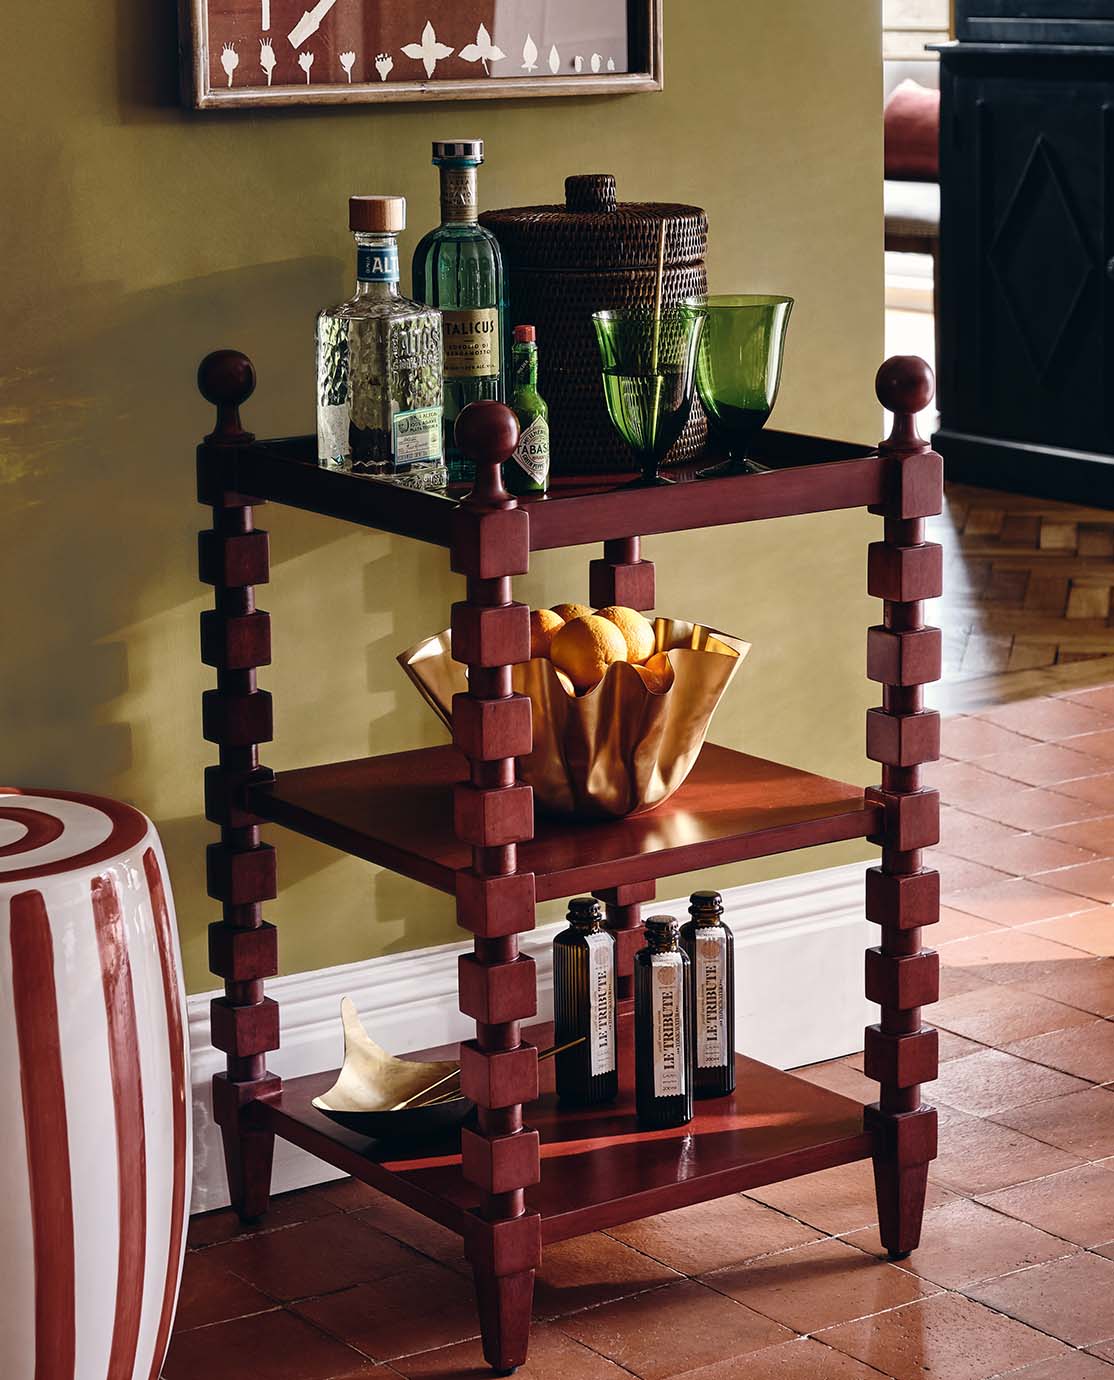 A red side table with cubed, bobbin-style legs, holding a selection of drinks and colorful glassware.